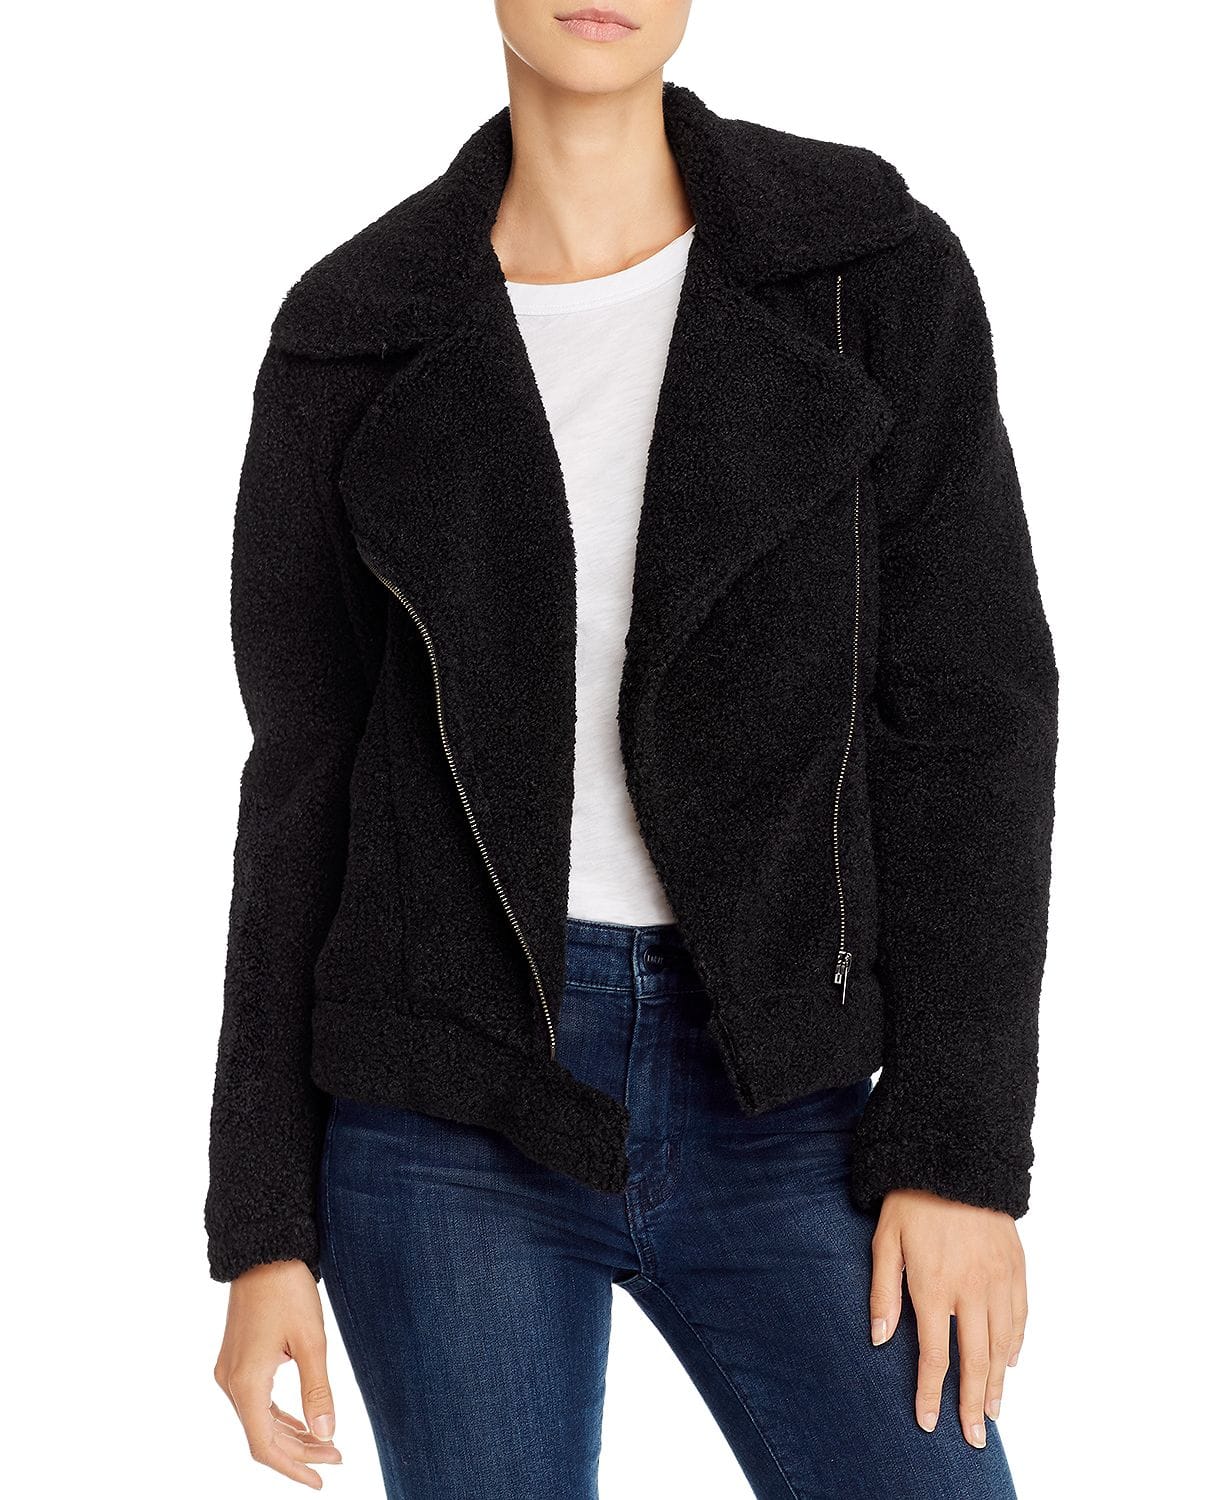 woocommerce-673321-2209615.cloudwaysapps.com-the-fifth-label-womens-black-herd-moto-inspired-teddy-jacket